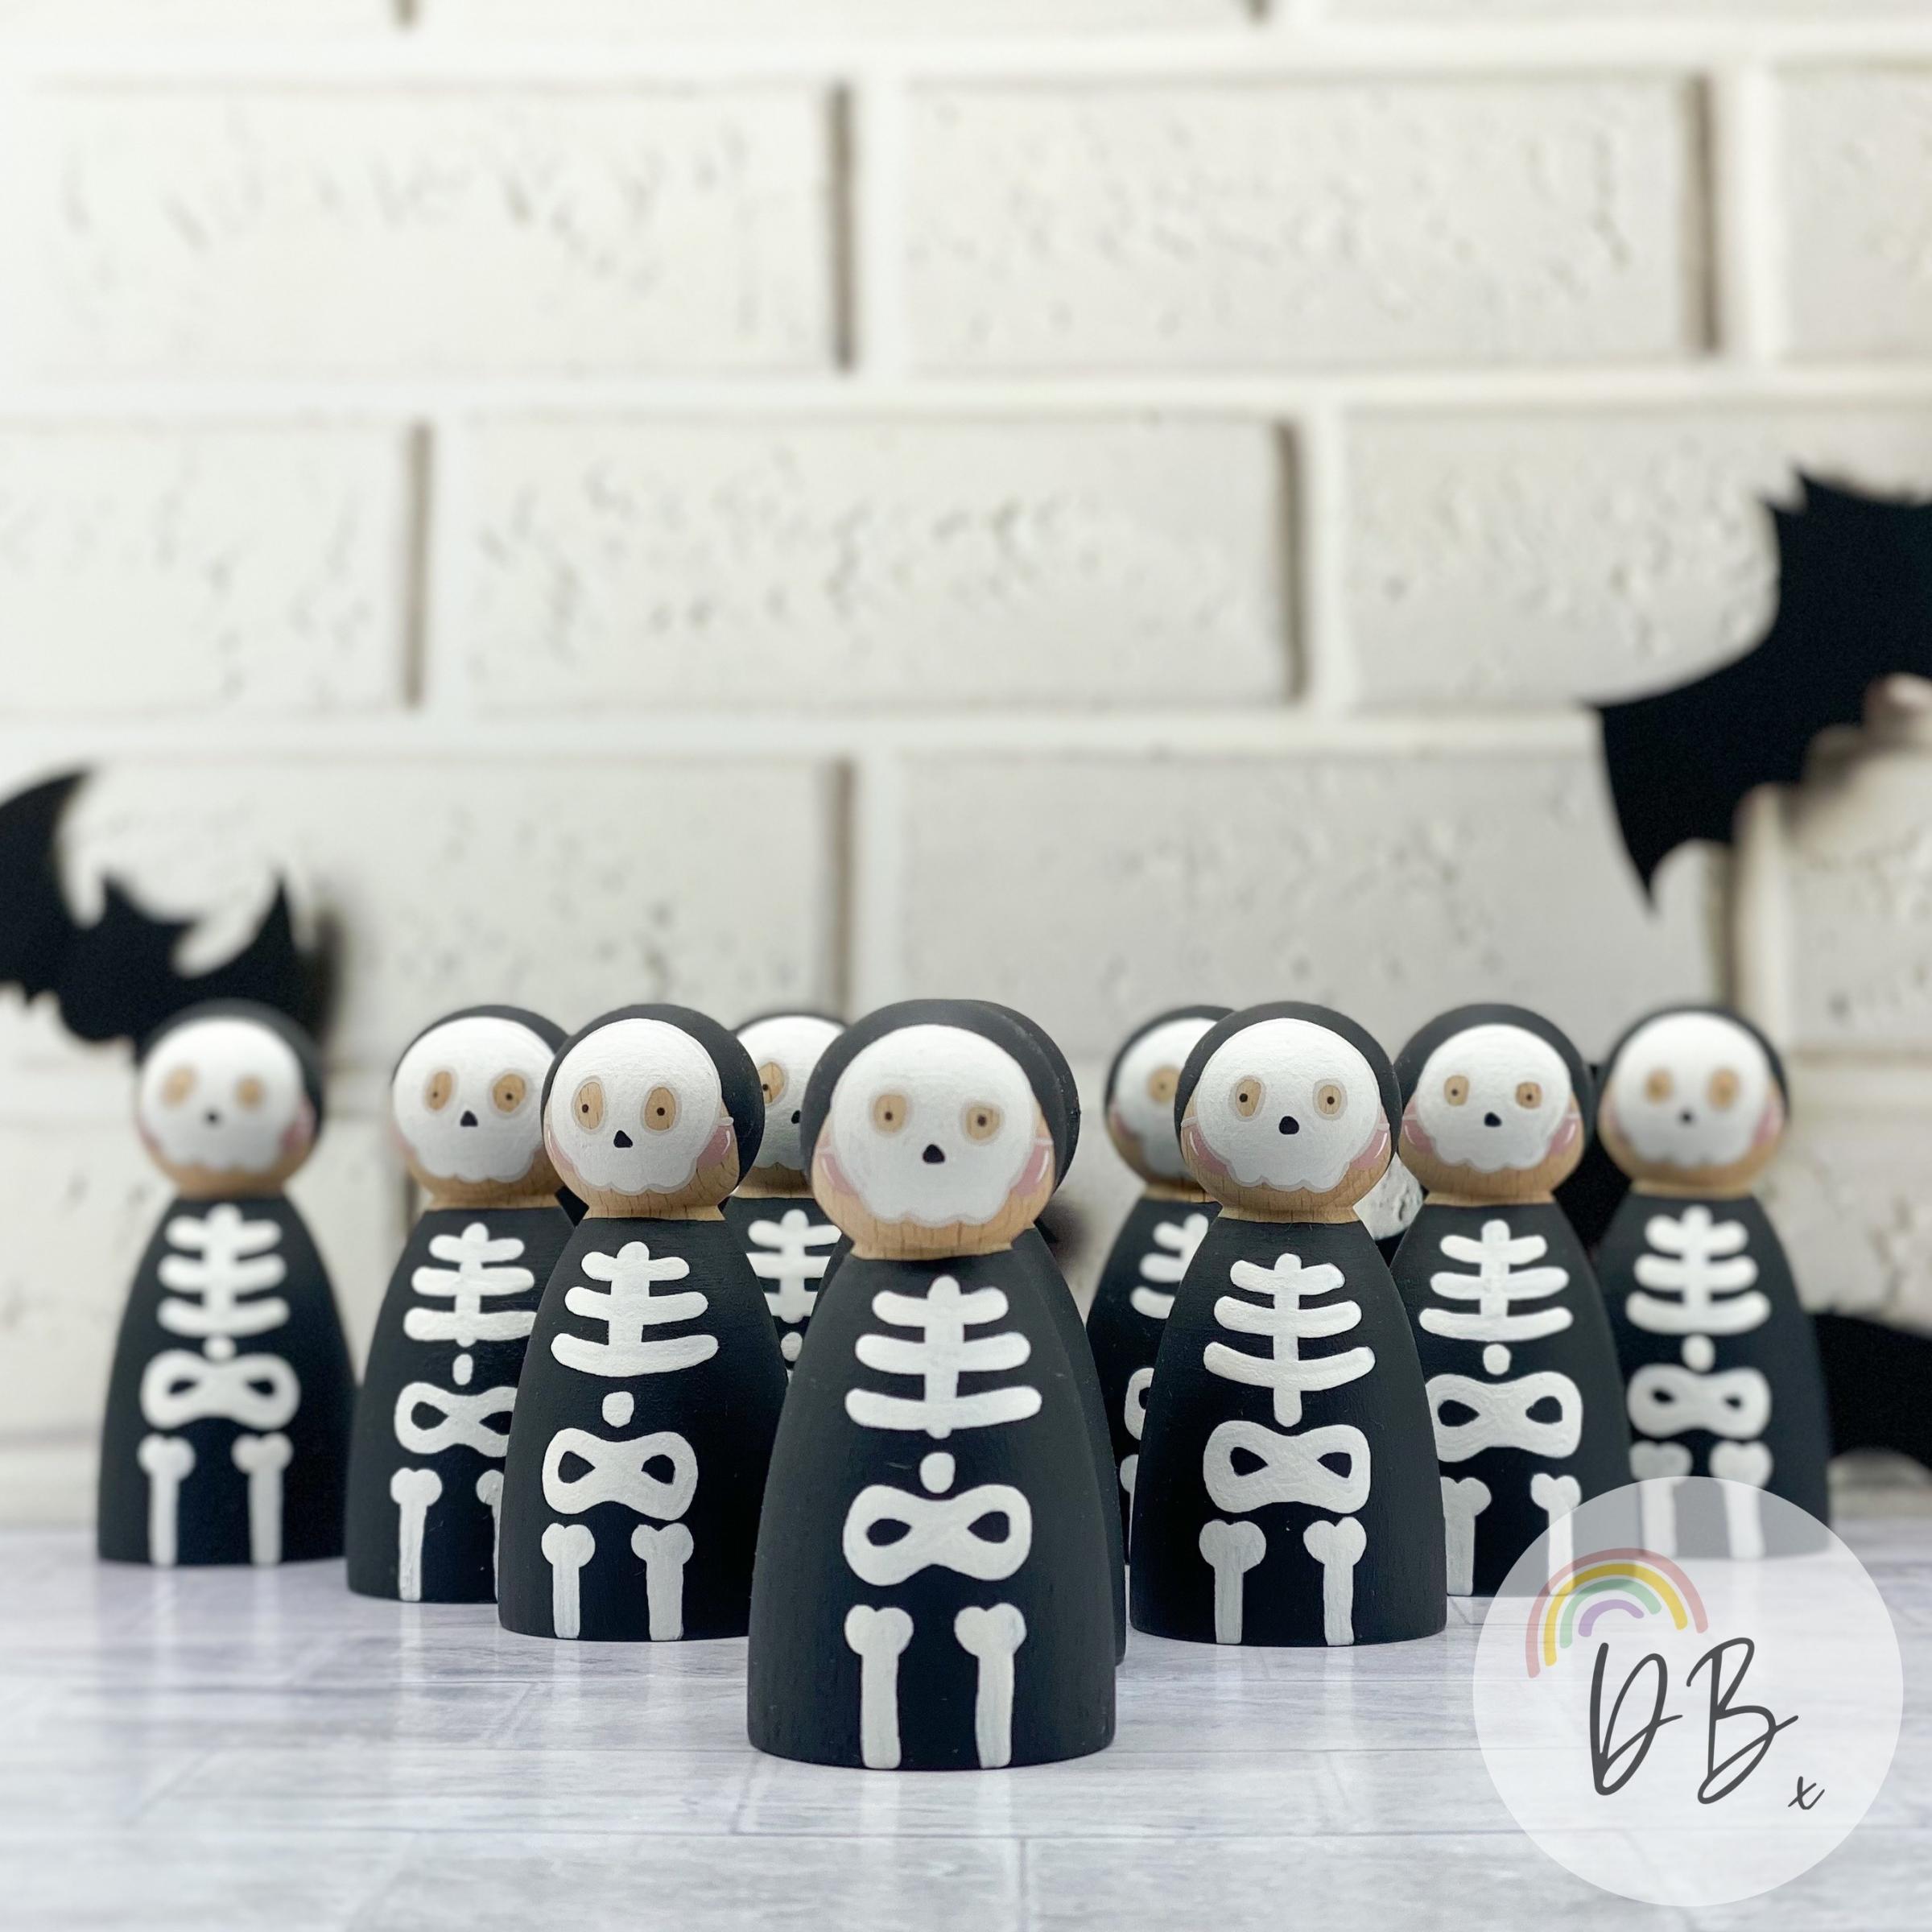 Spooky Dilly Blue dolls ready for Halloween.